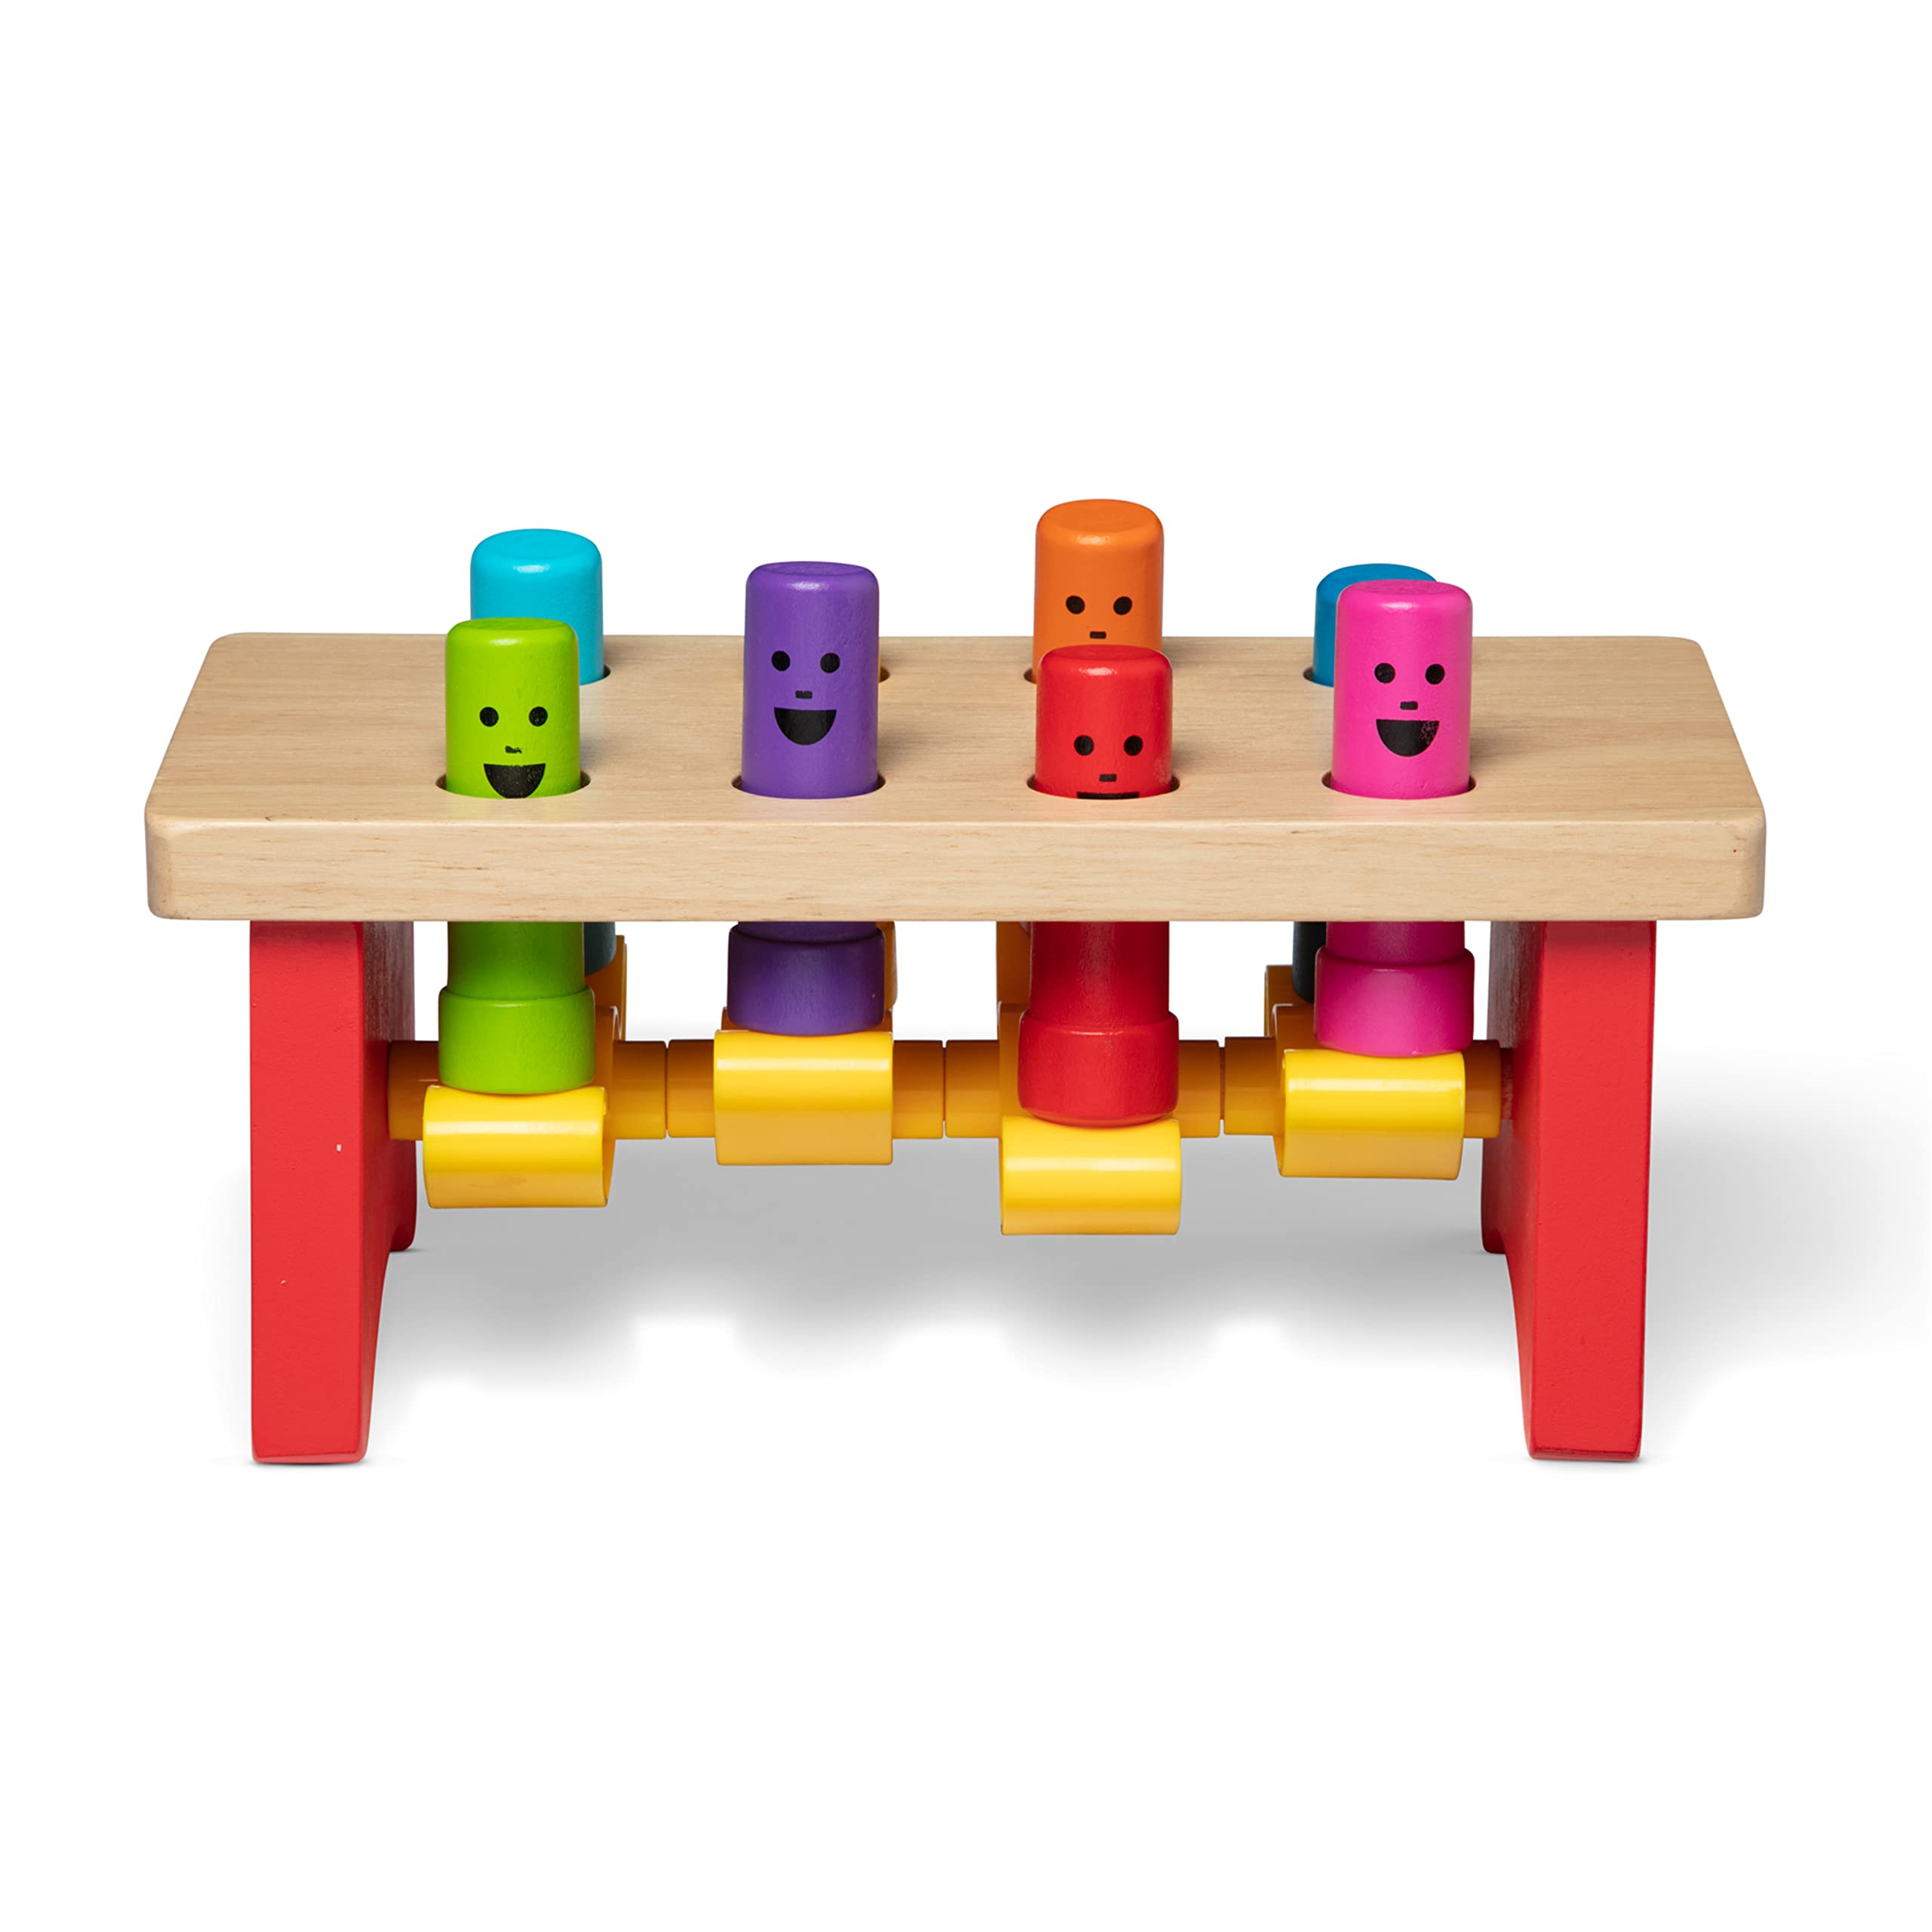 Melissa & Doug Deluxe Pounding Bench Wooden Toy With Mallet